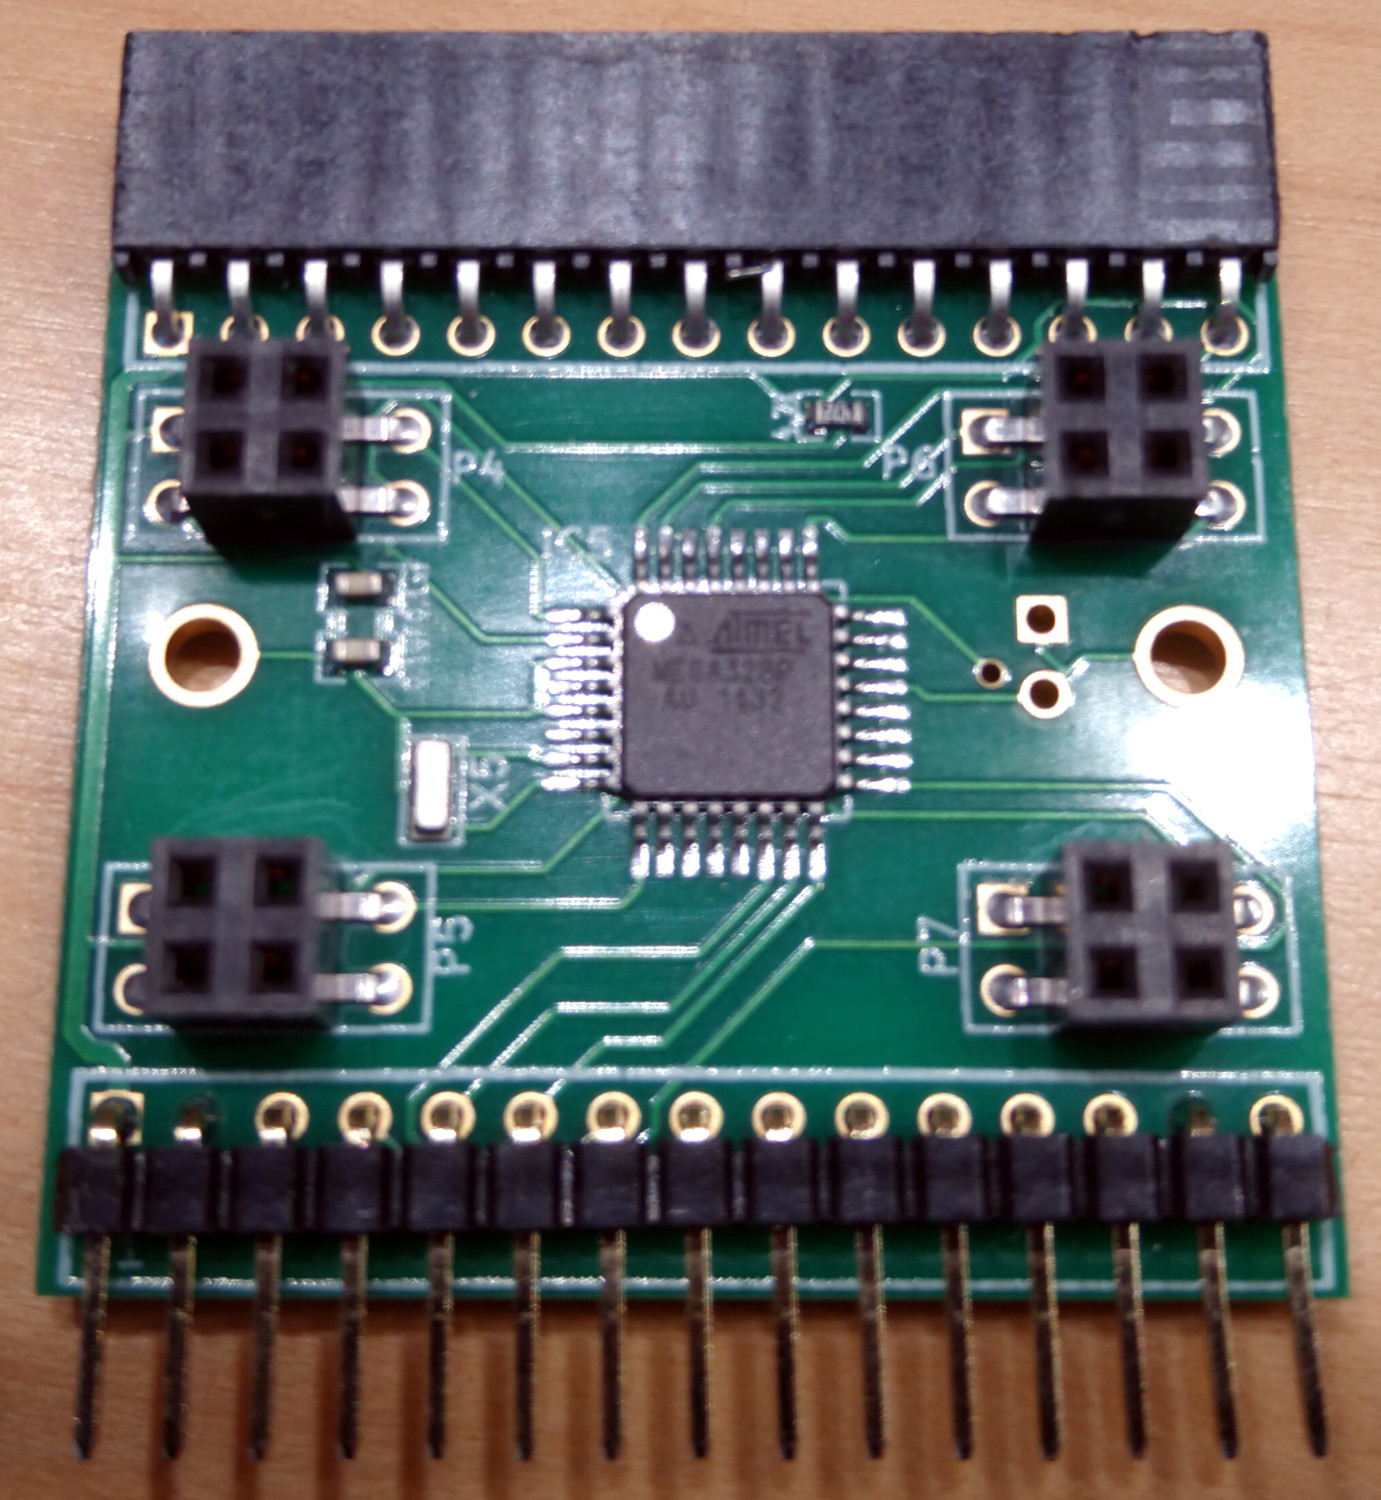 A picture of the assembled board v0.3